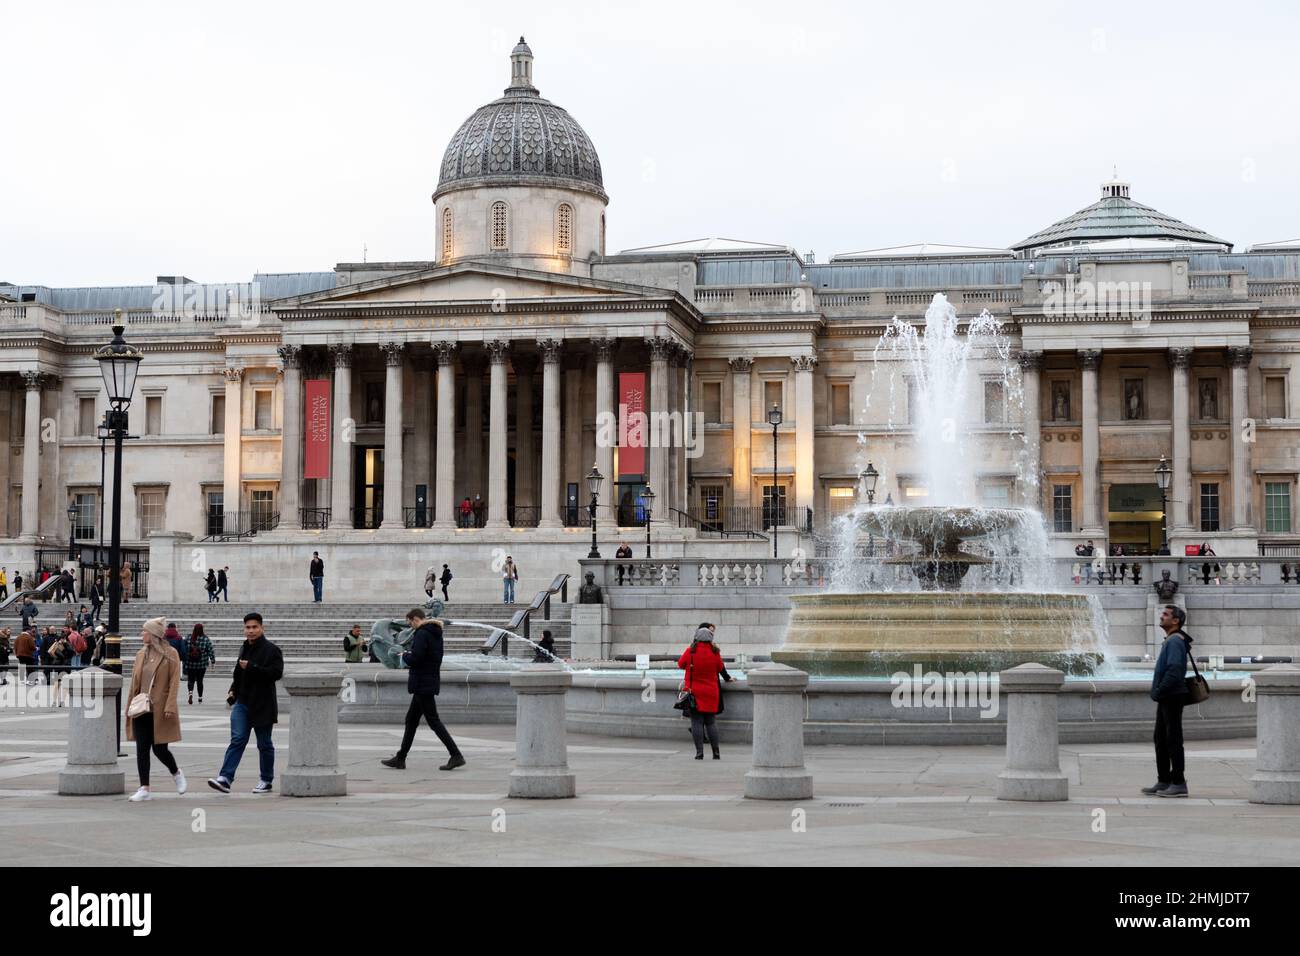 A general view of Trafalgar Square, London, showing the National Gallery (L) and the National Portrait Gallery (R). Stock Photo